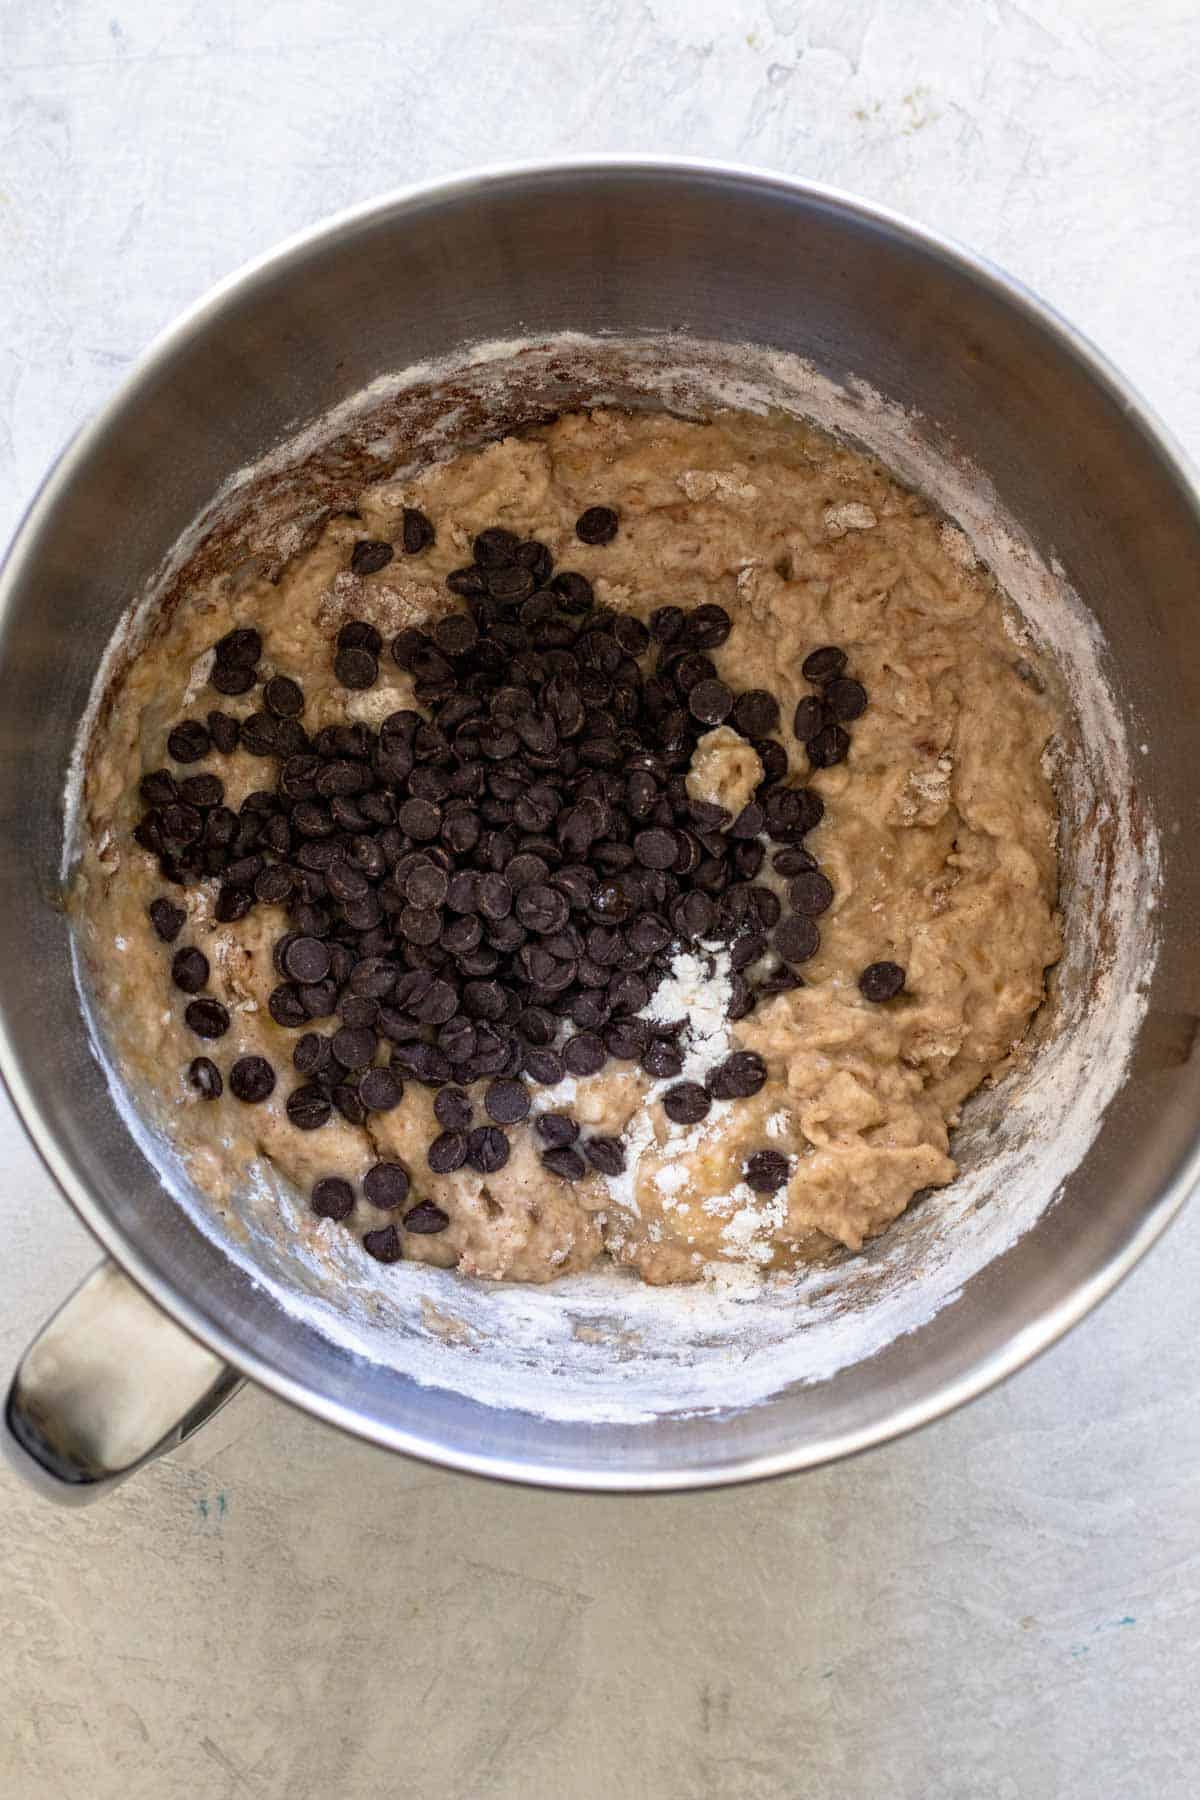 Vegan chocoalte chips added into banana bread batter in mixing bowl.